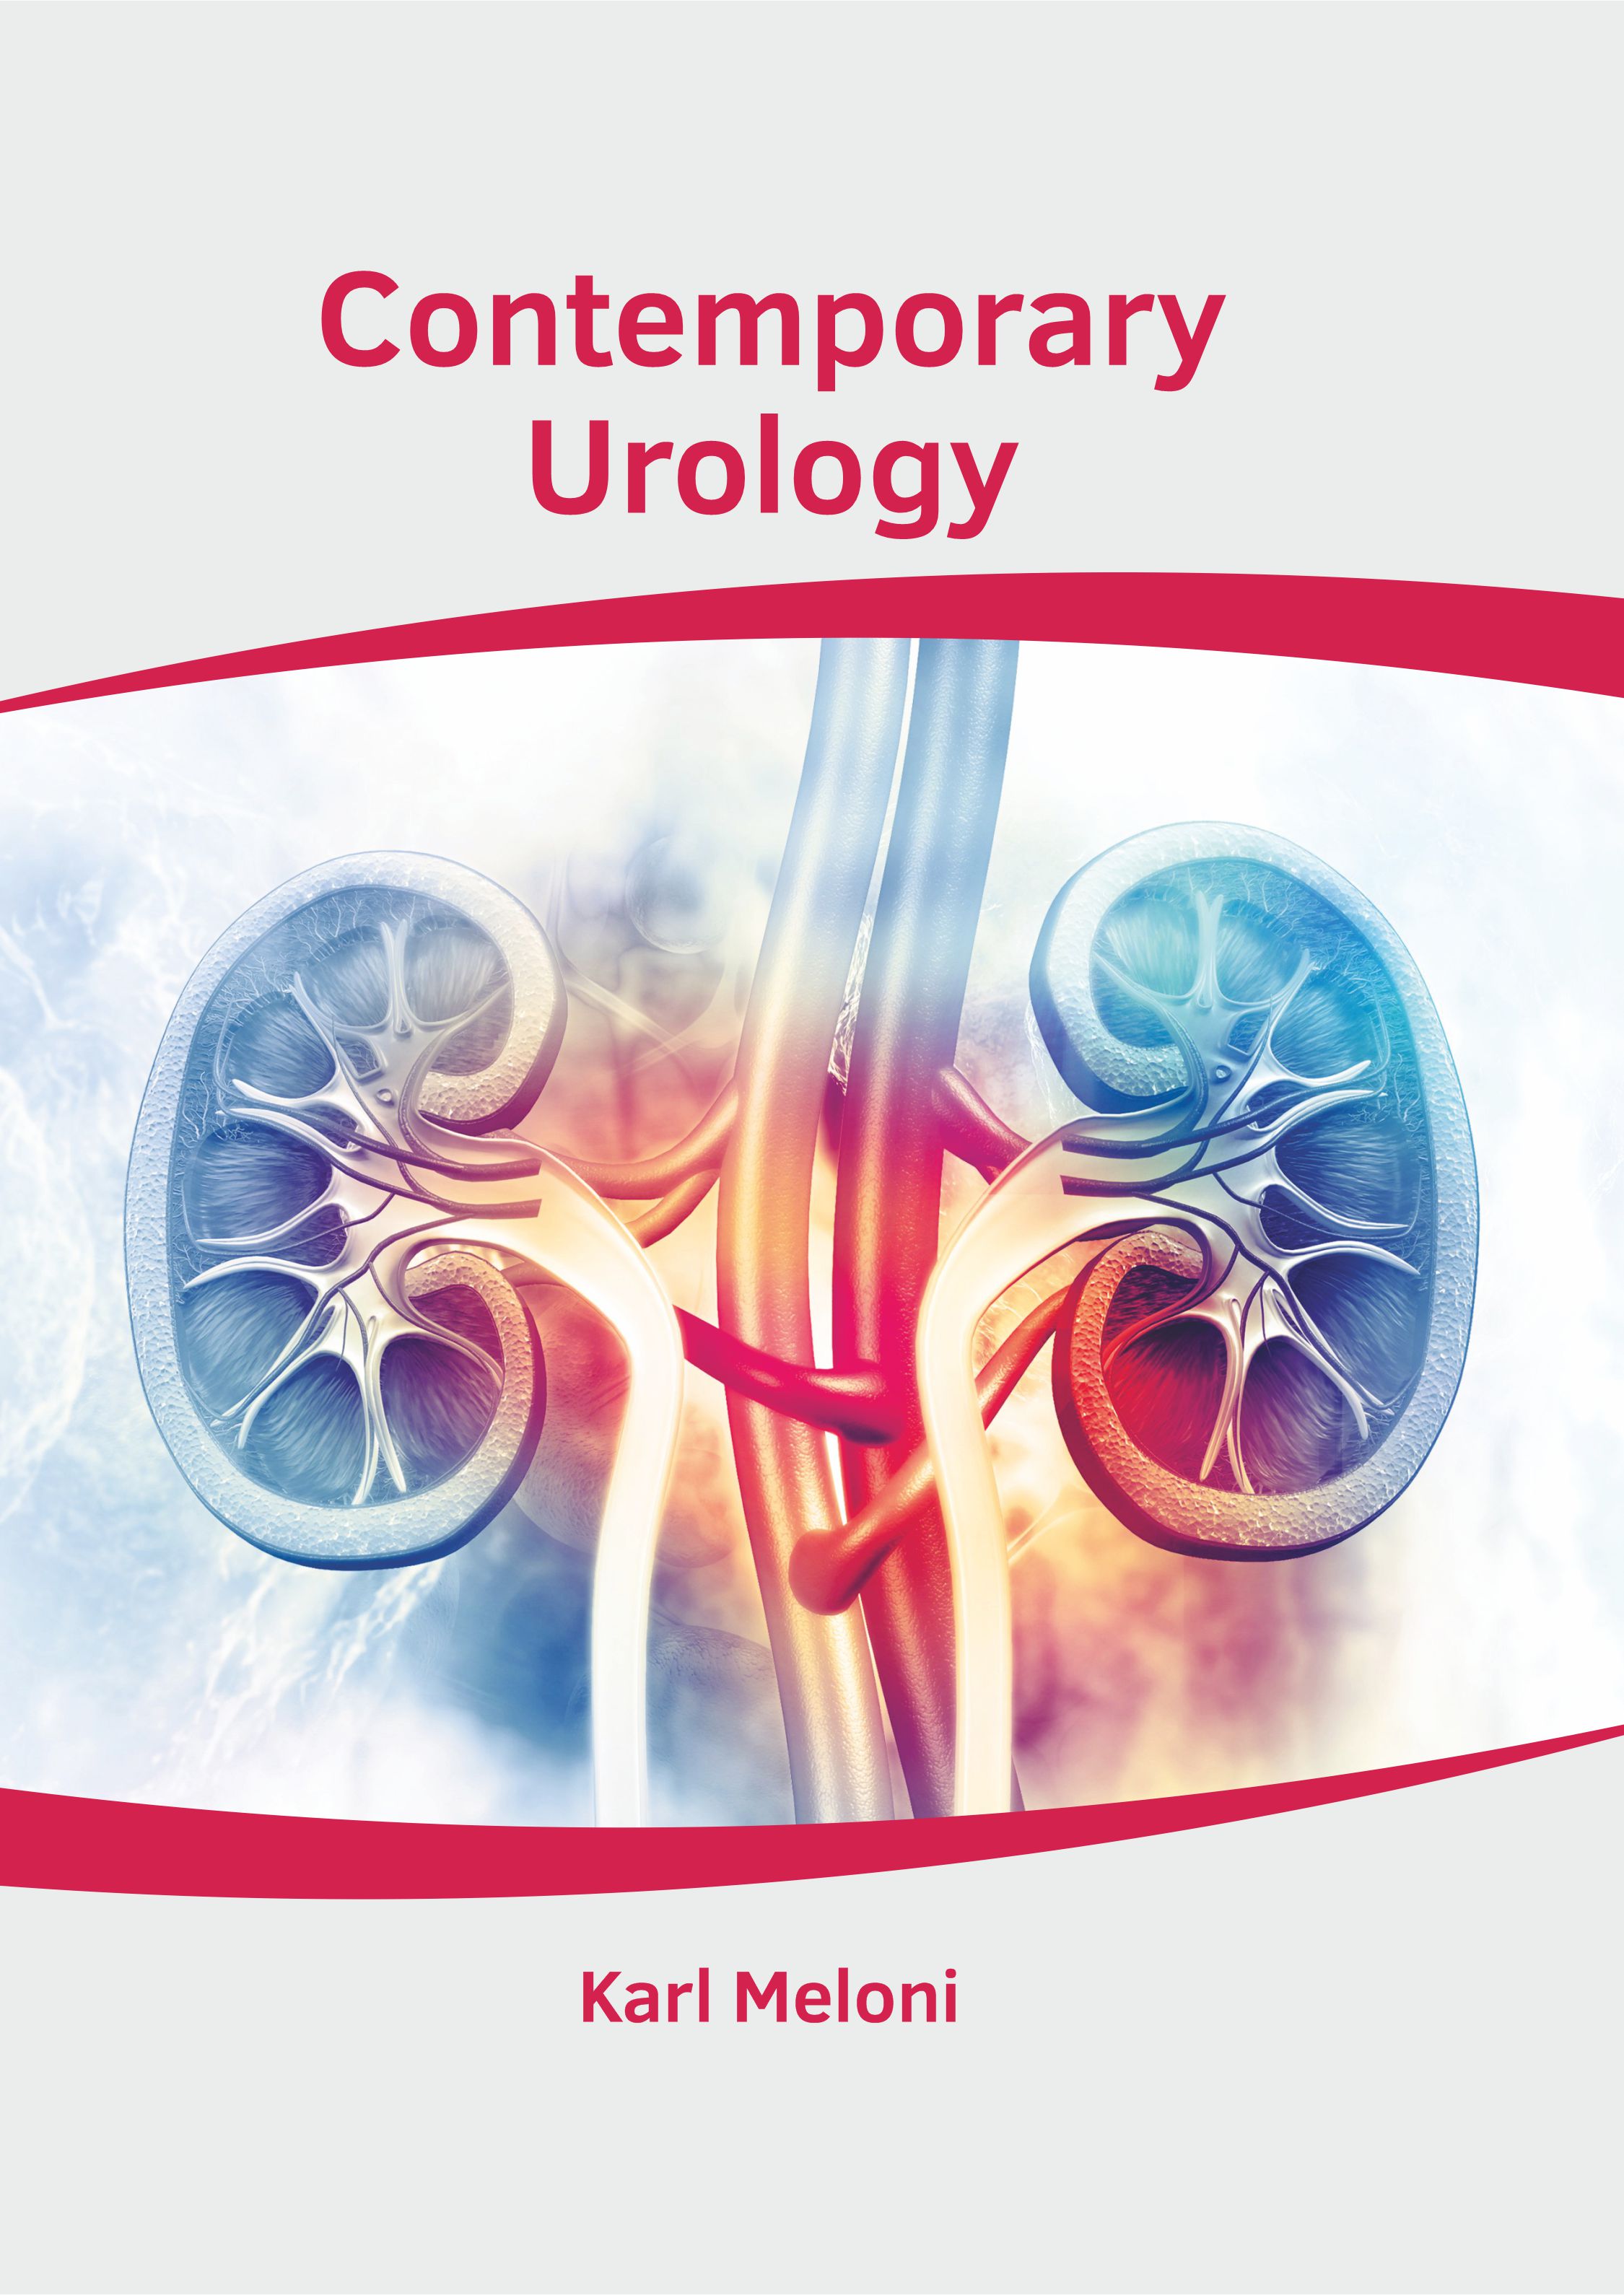 

exclusive-publishers/american-medical-publishers/contemporary-urology-9781639275120